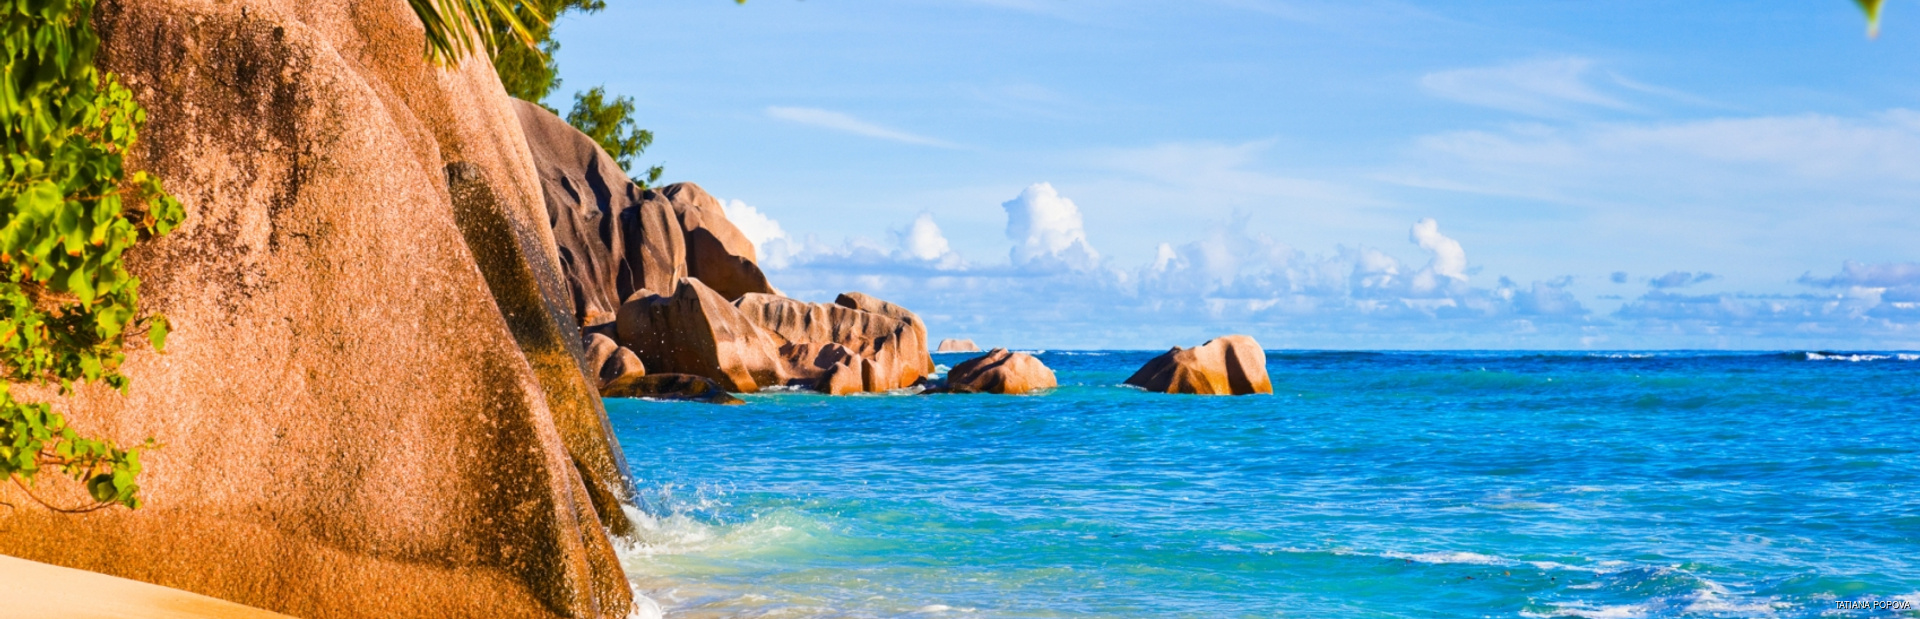 Fall in Love with Anse Source d'Argent